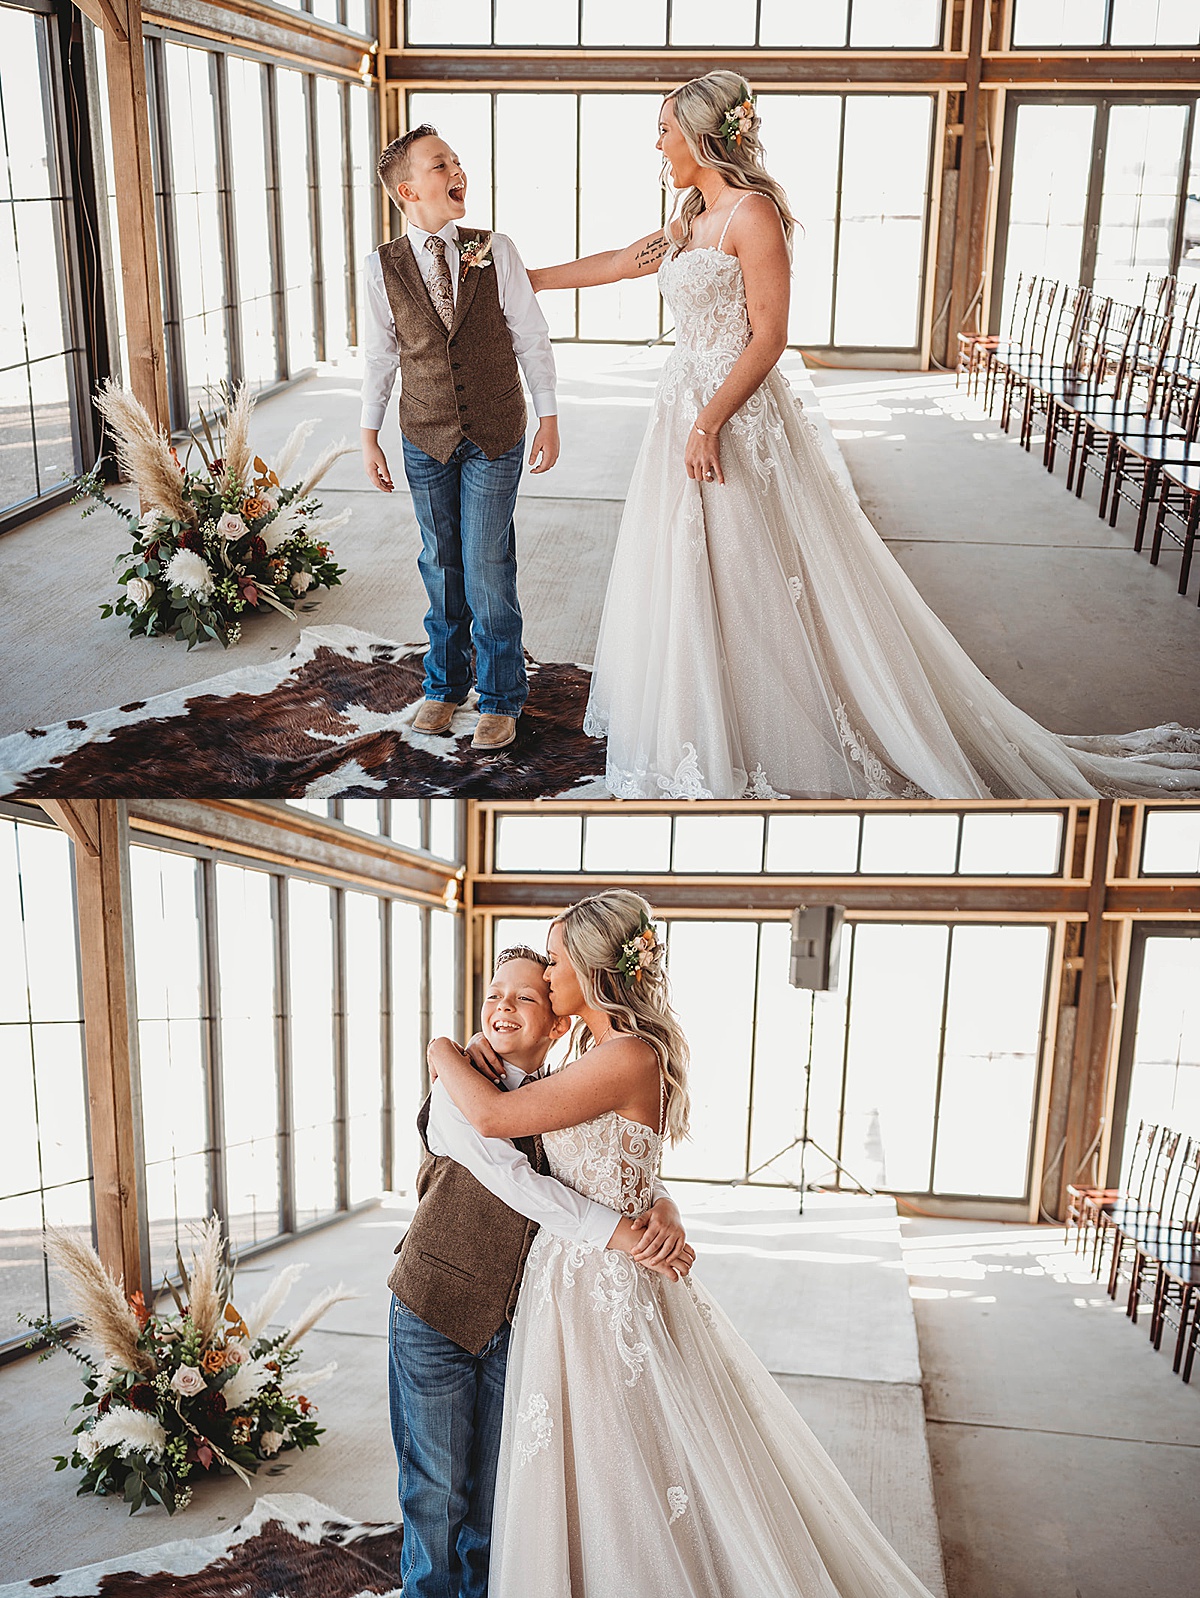 Bride does first look with son and gives him a hug before boho prairie wedding